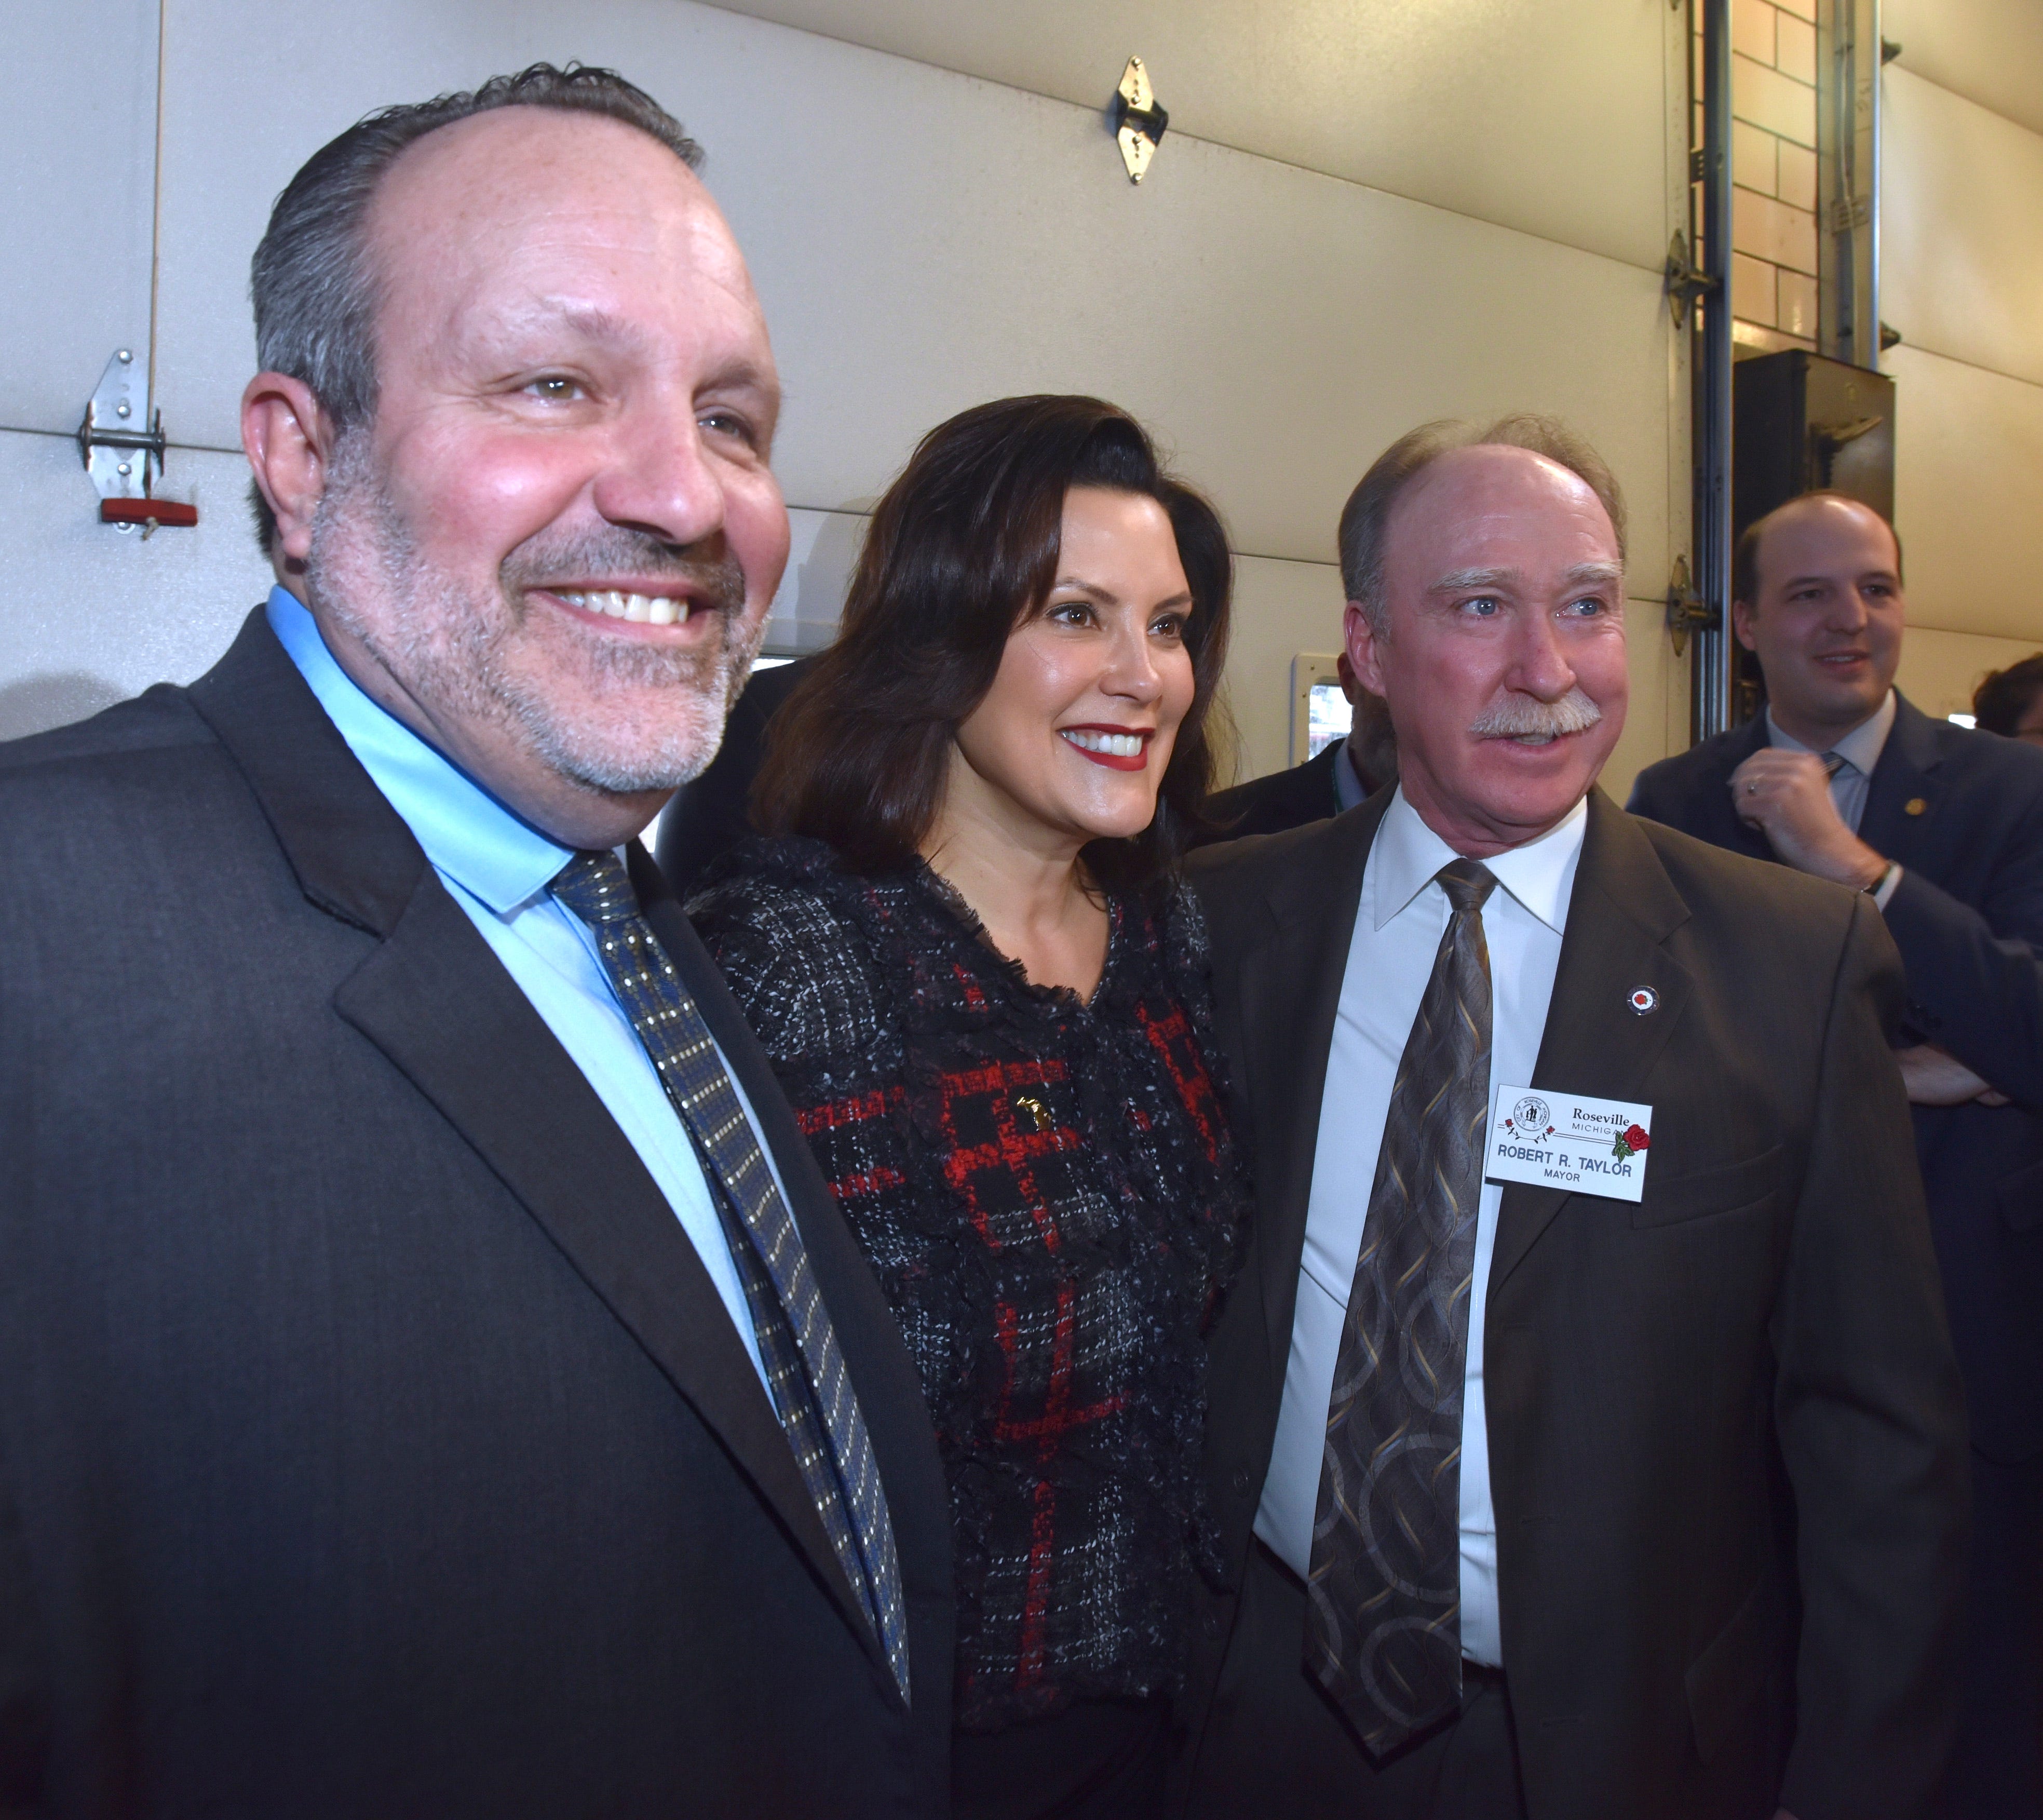 Center Line Mayor Robert Binson, left, and Roseville Mayor Robert Taylor, right, pose with Michigan Governor Gretchen Whitmer, center, after the press conference.